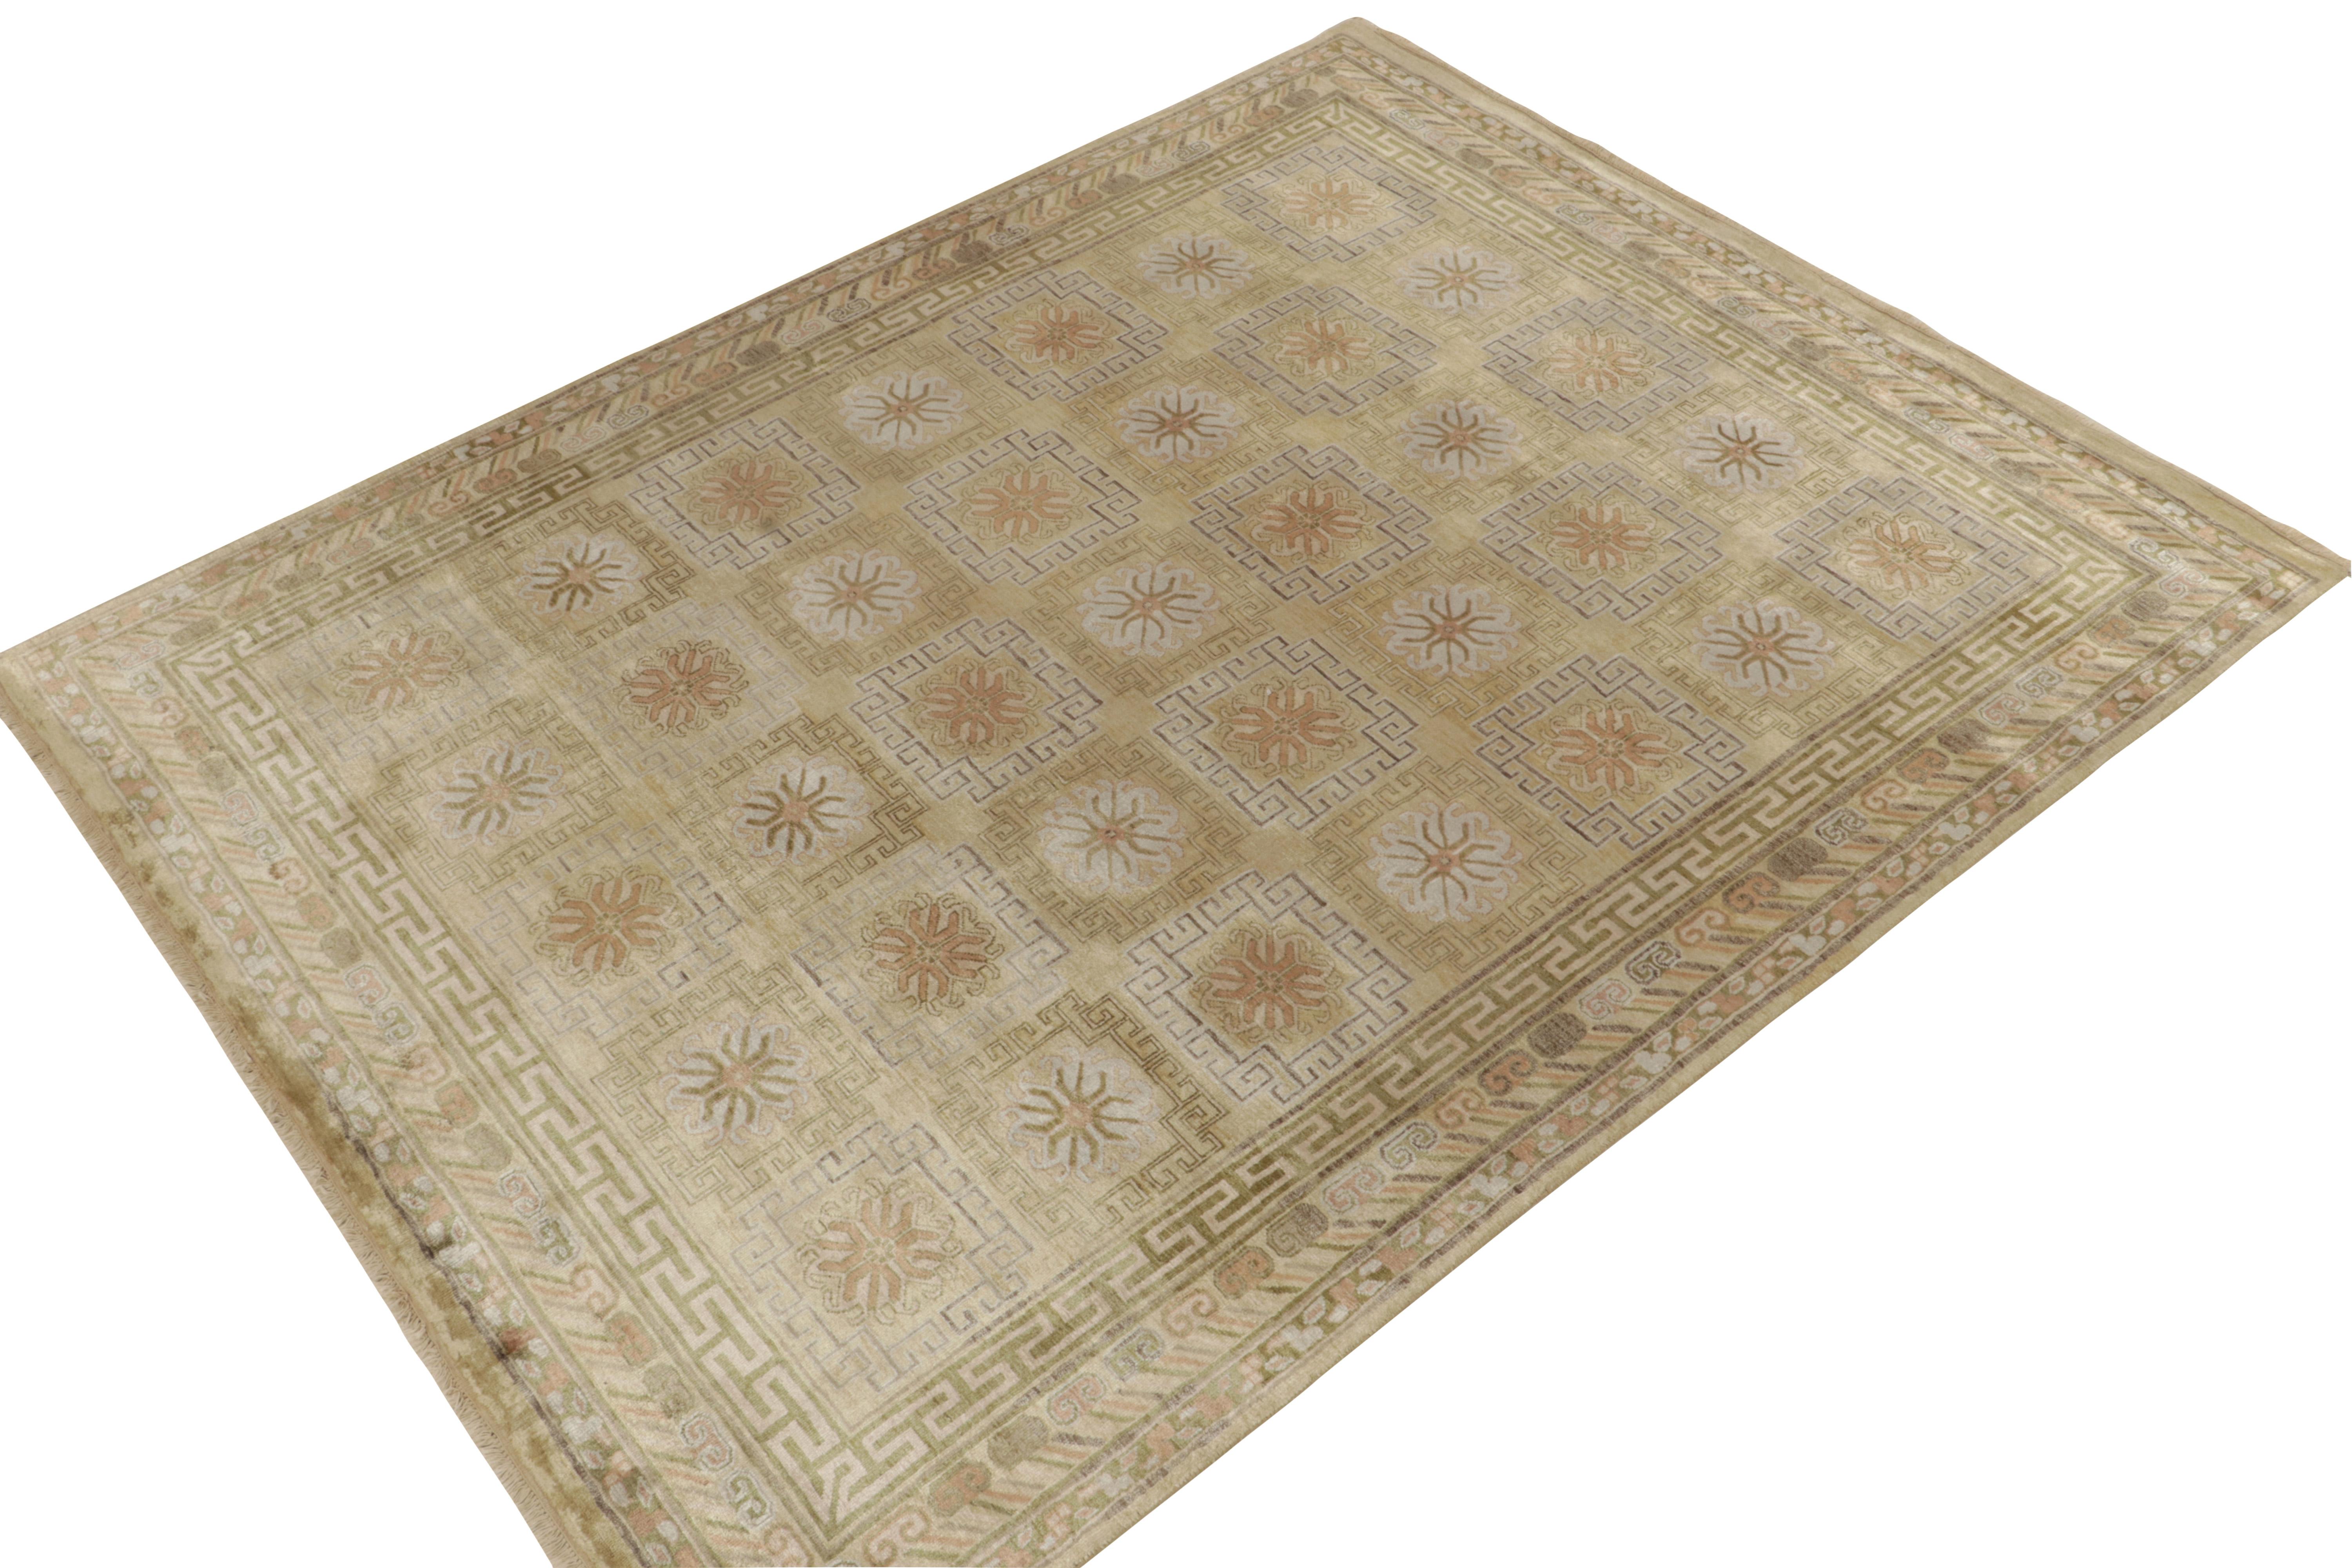 Handknotted in luxurious silk, this 8x10 rug from our Modern Classics collection is particularly inspired by antique Khotan-Samarkand rugs.

On the Design: A gracious scale hosts an alluring gold and beige-brown undertone, playing with the silk’s